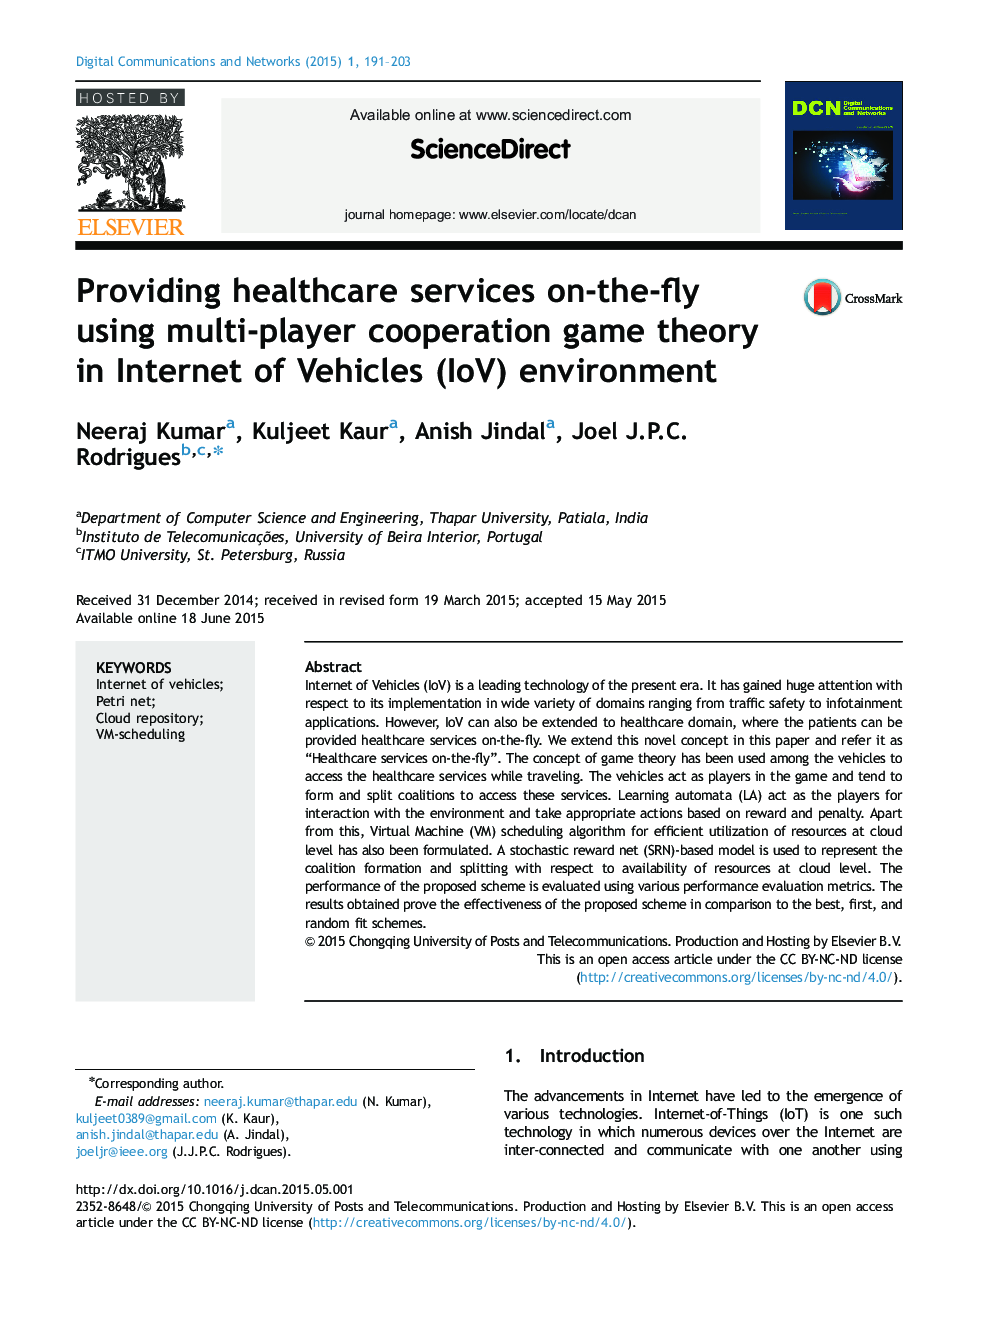 Providing healthcare services on-the-fly using multi-player cooperation game theory in Internet of Vehicles (IoV) environment